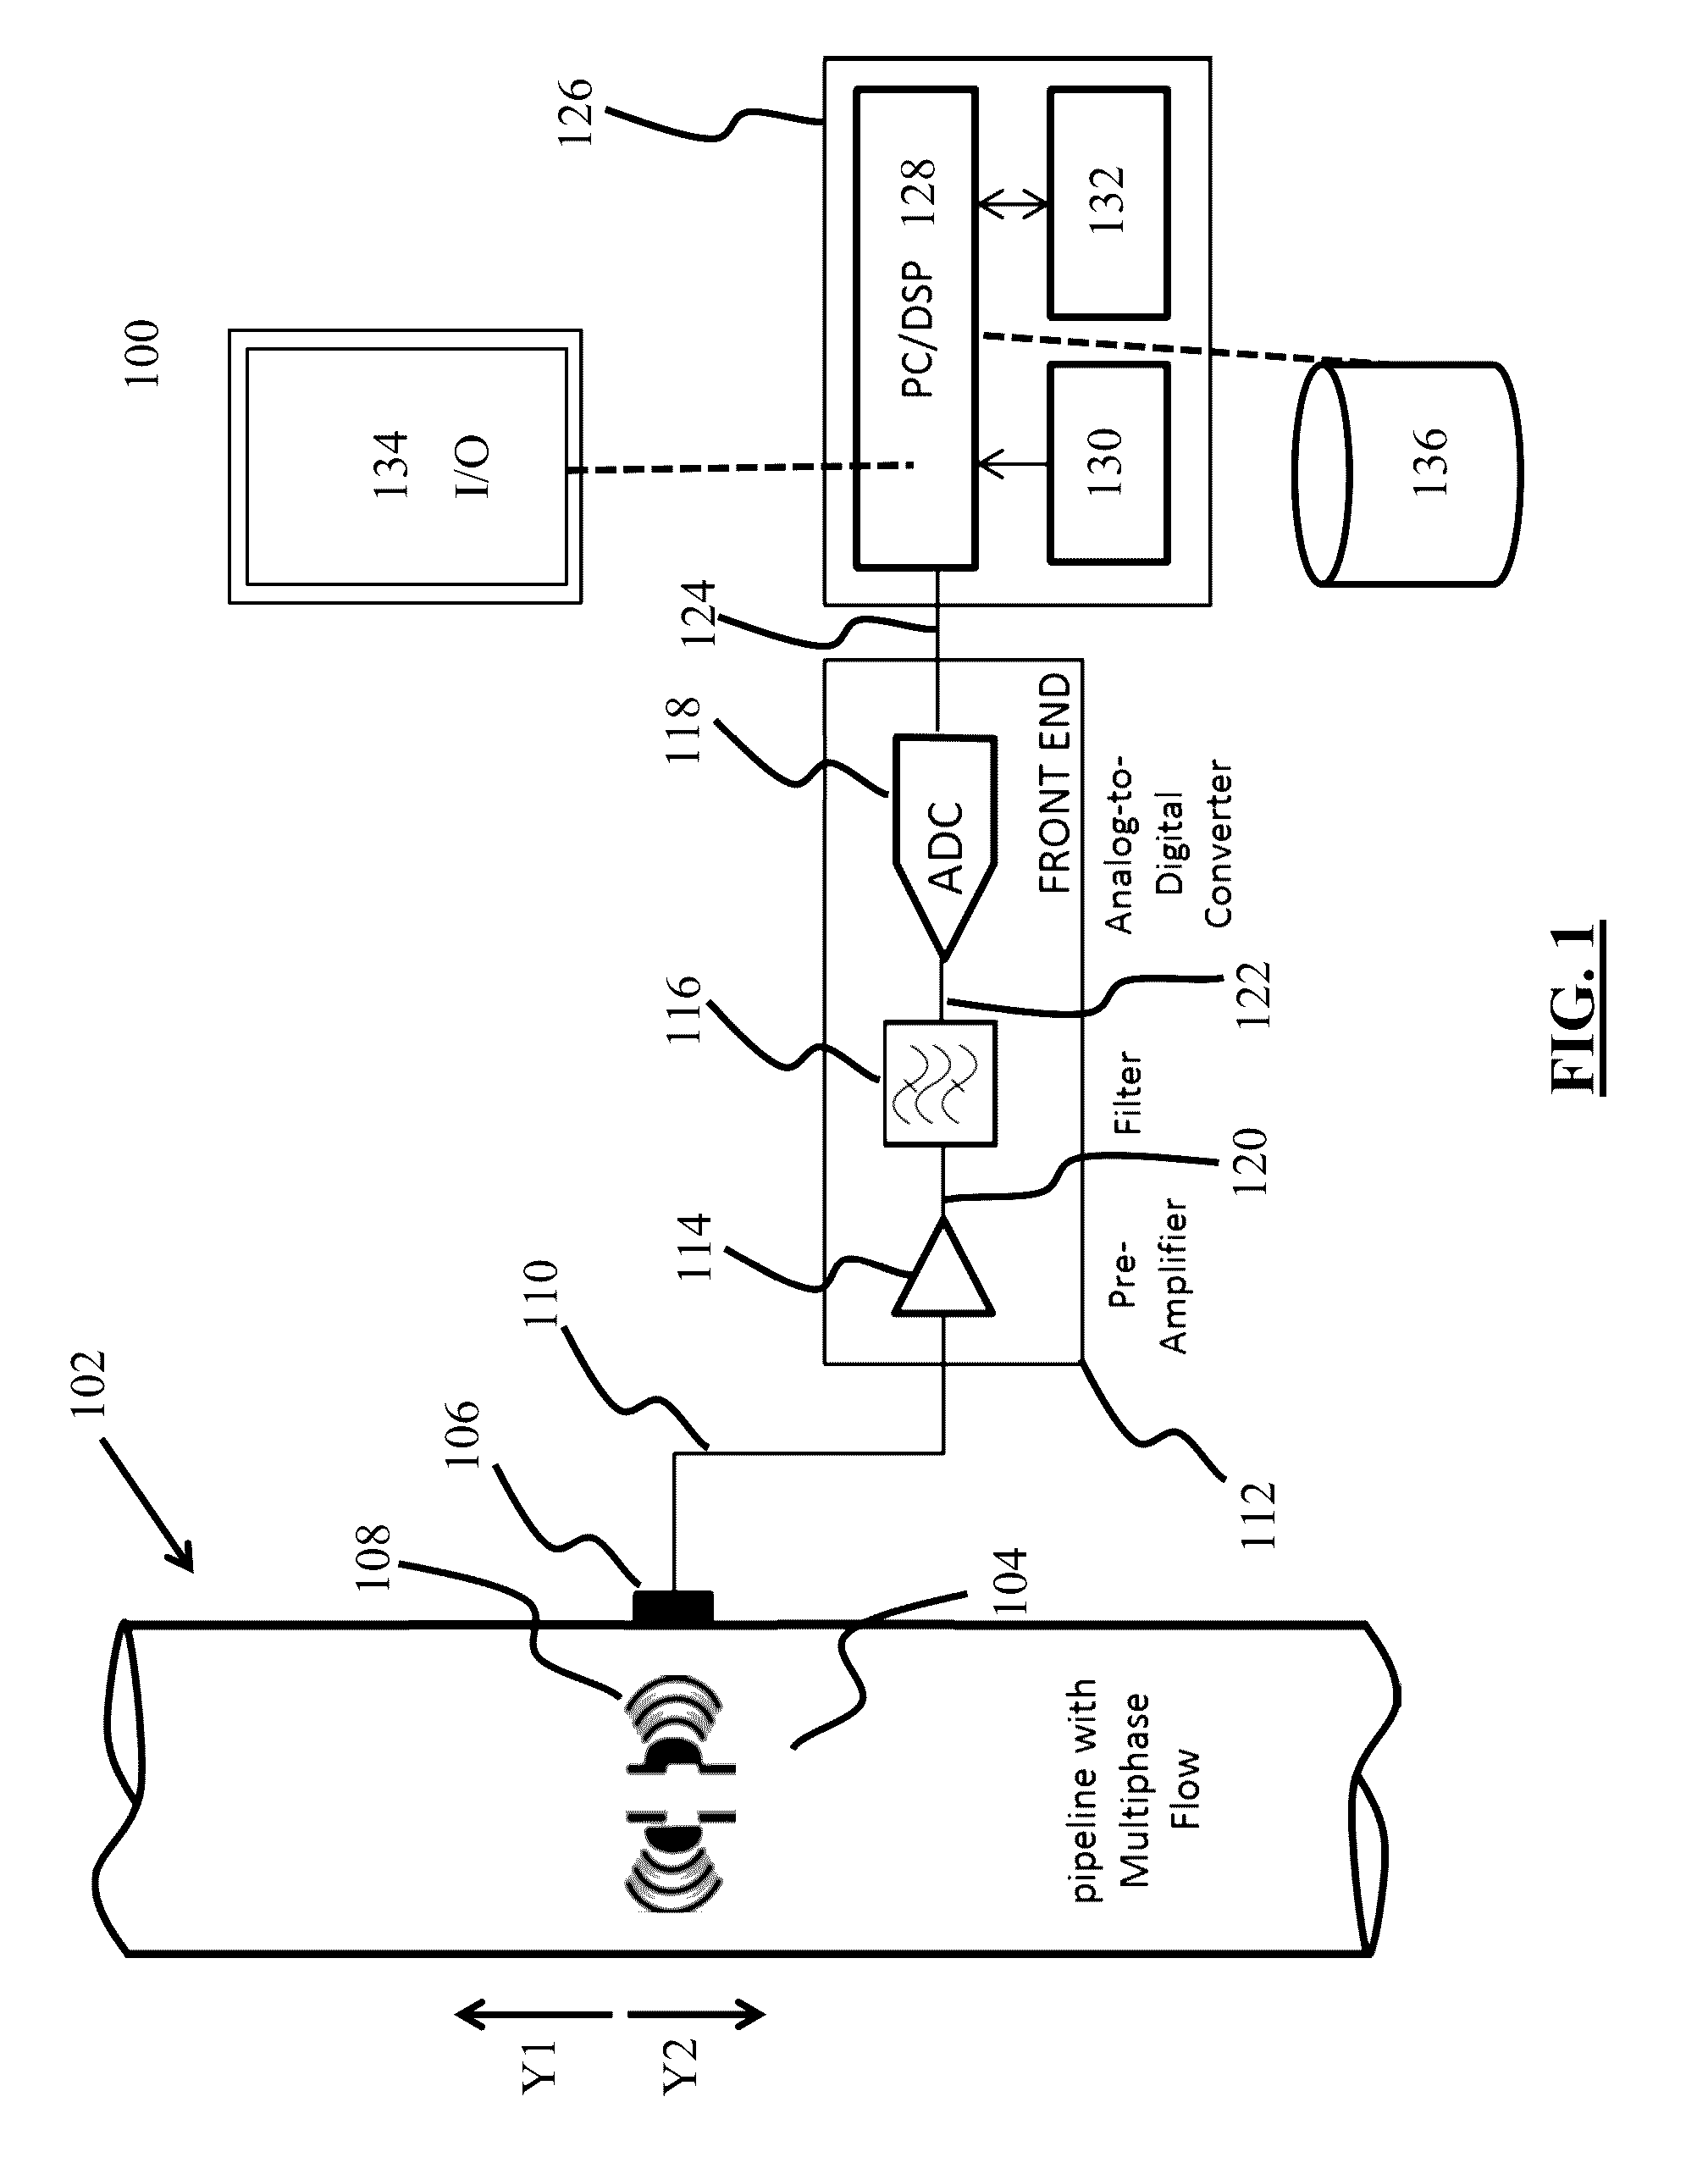 Systems, methods, and computer medium to provide entropy based characterization of multiphase flow